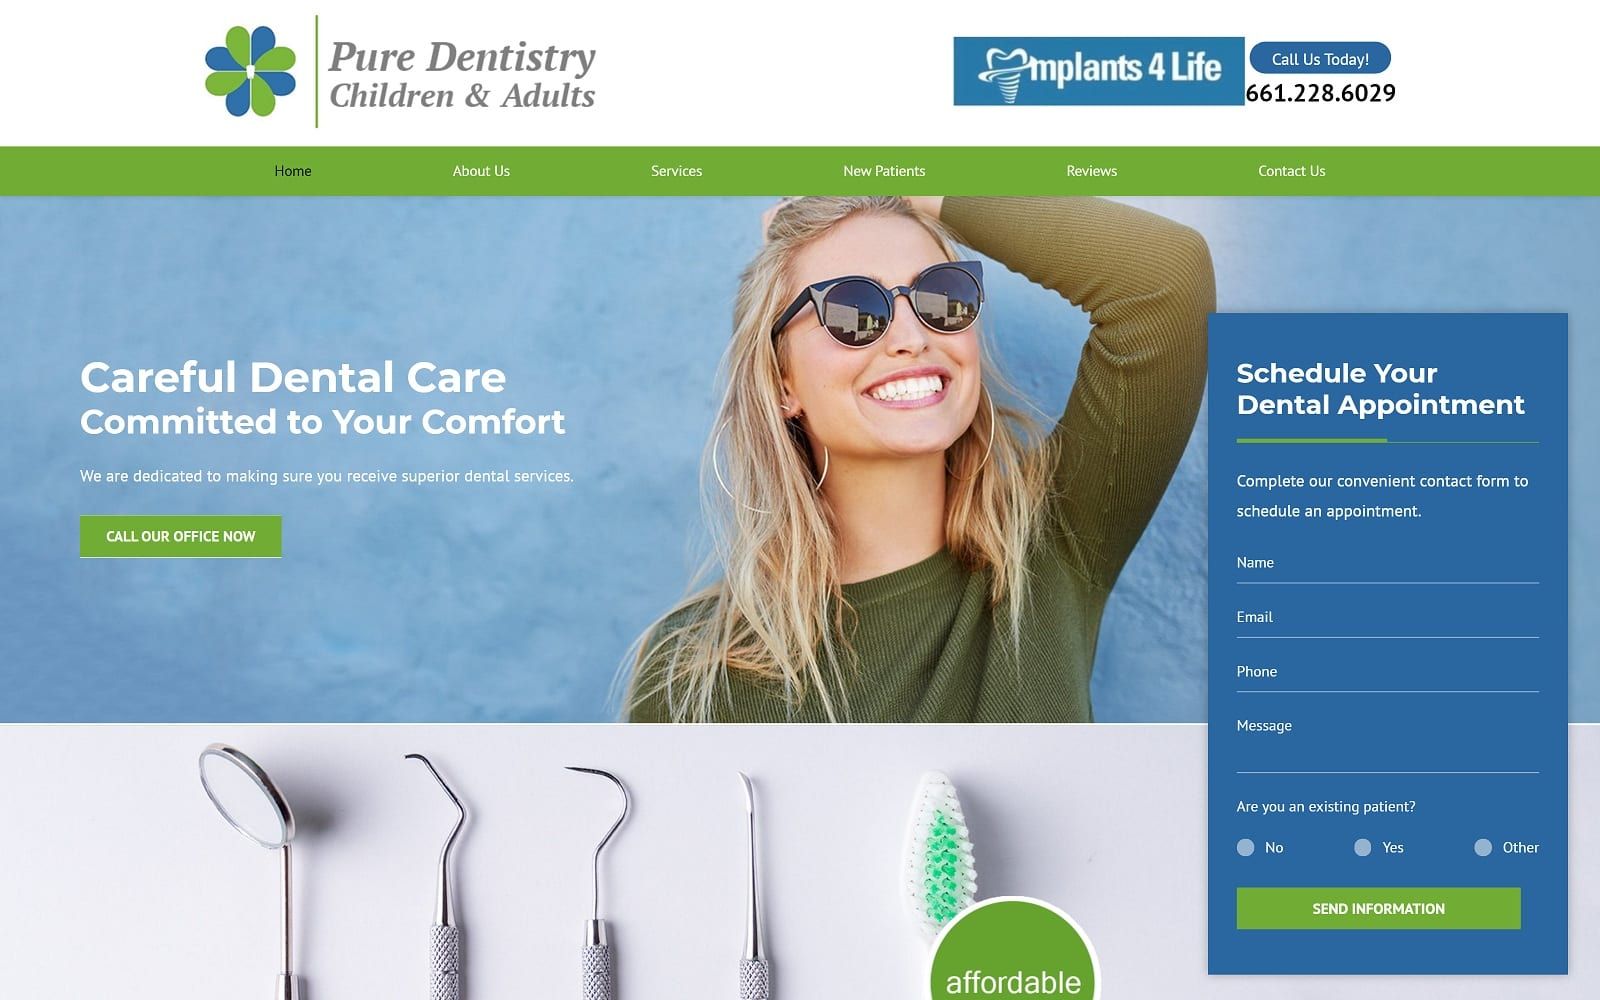 The screenshot of pure dentistry children & adults puredentistrychildrenandadults. Com website